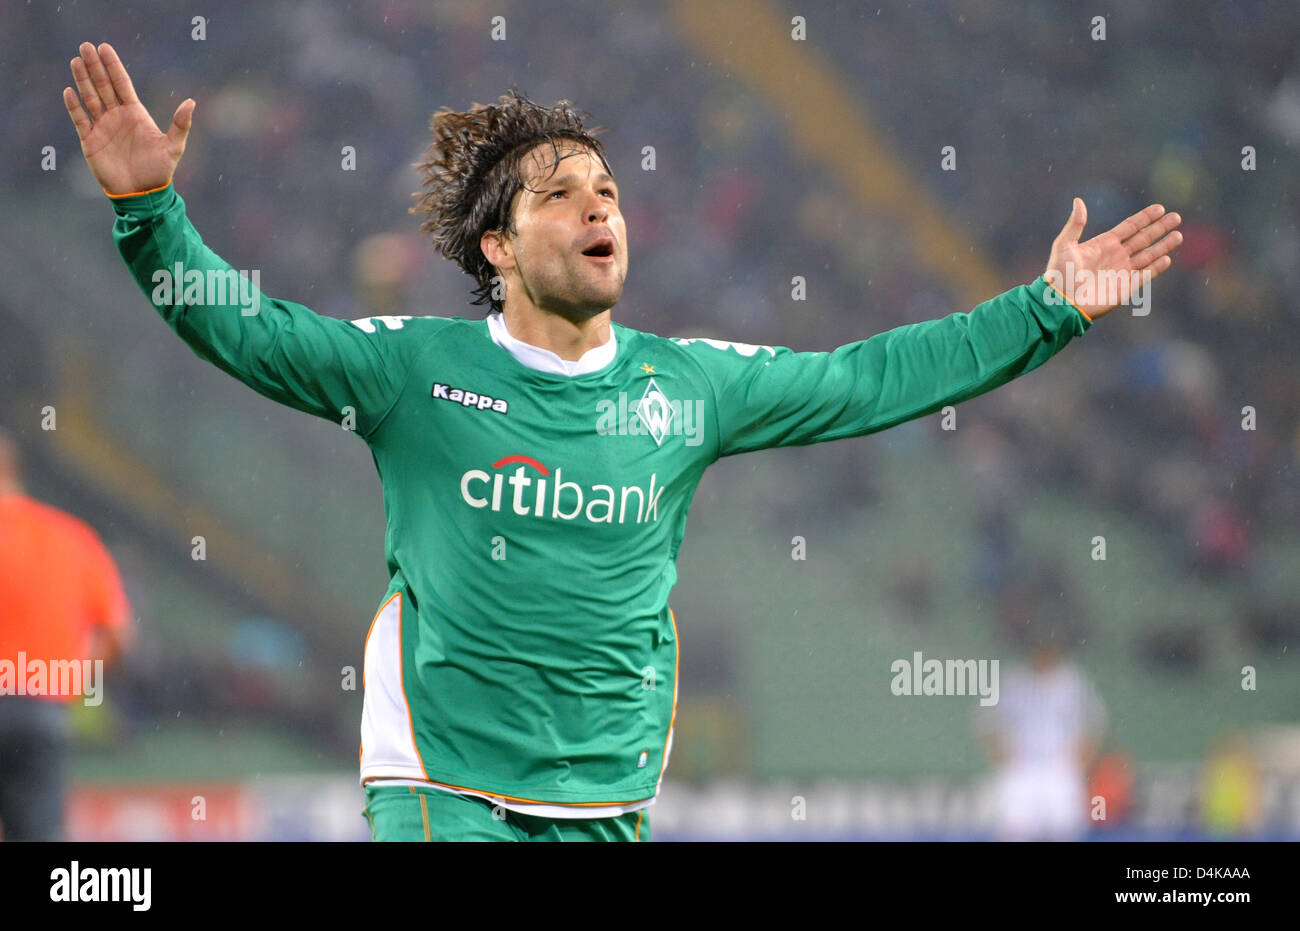 Bremen?s Diego cheers after his goal to 1-1during the UEFA Cup quarter finals second leg match Udinese vs Werder Bremen at Stadio Friuli in Udine, Italy, 16 April 2009. The match tied 3-3. Photo: Carmen Jaspersen Stock Photo